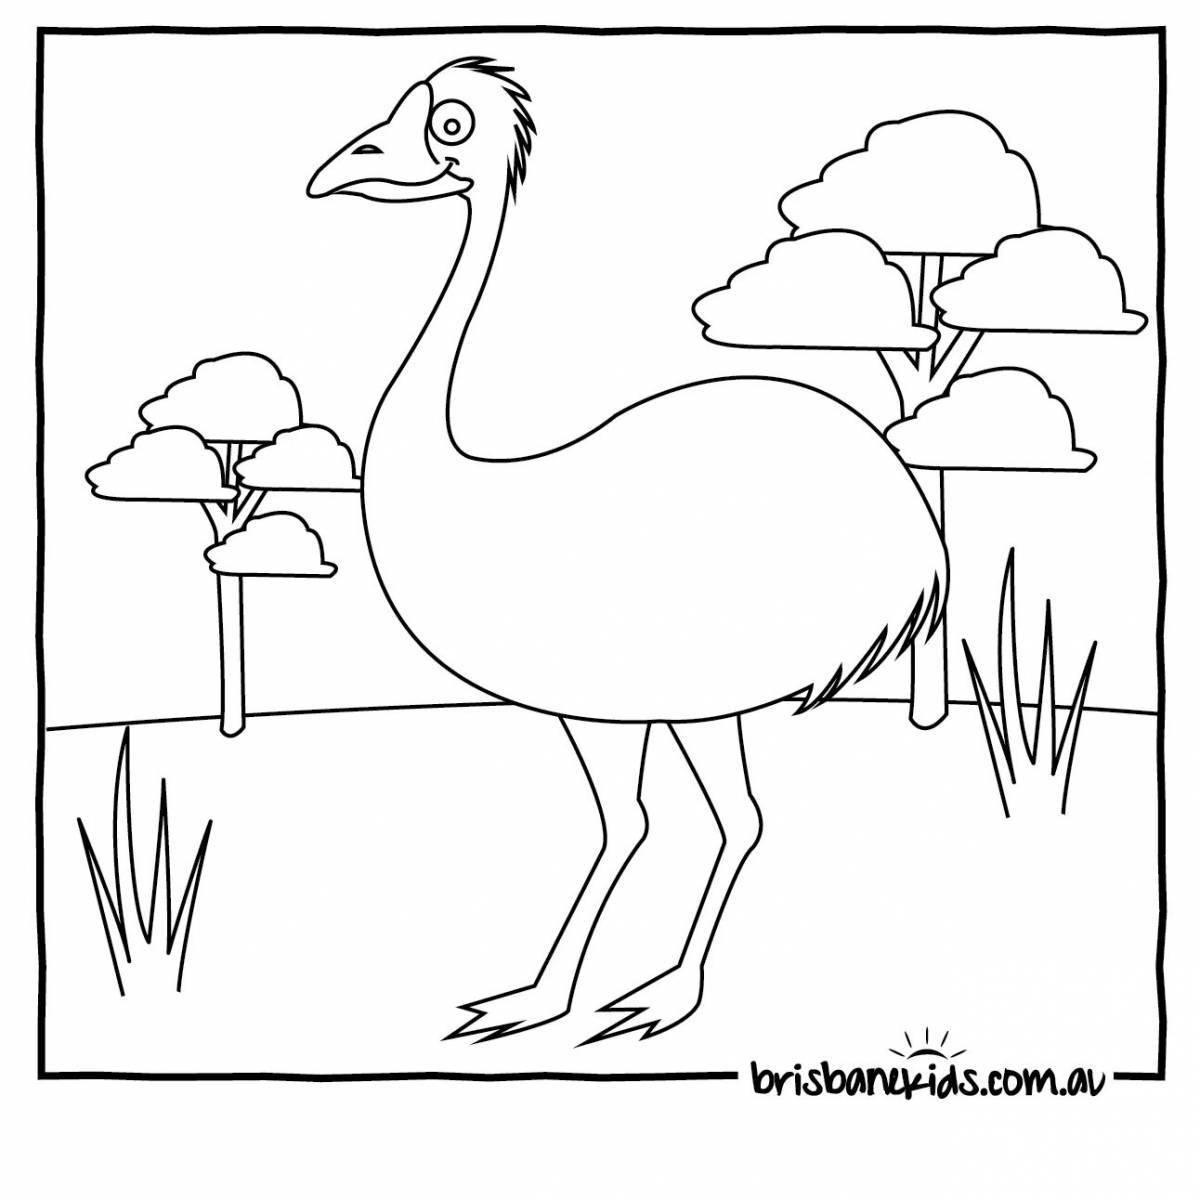 Australian animal coloring page for kids